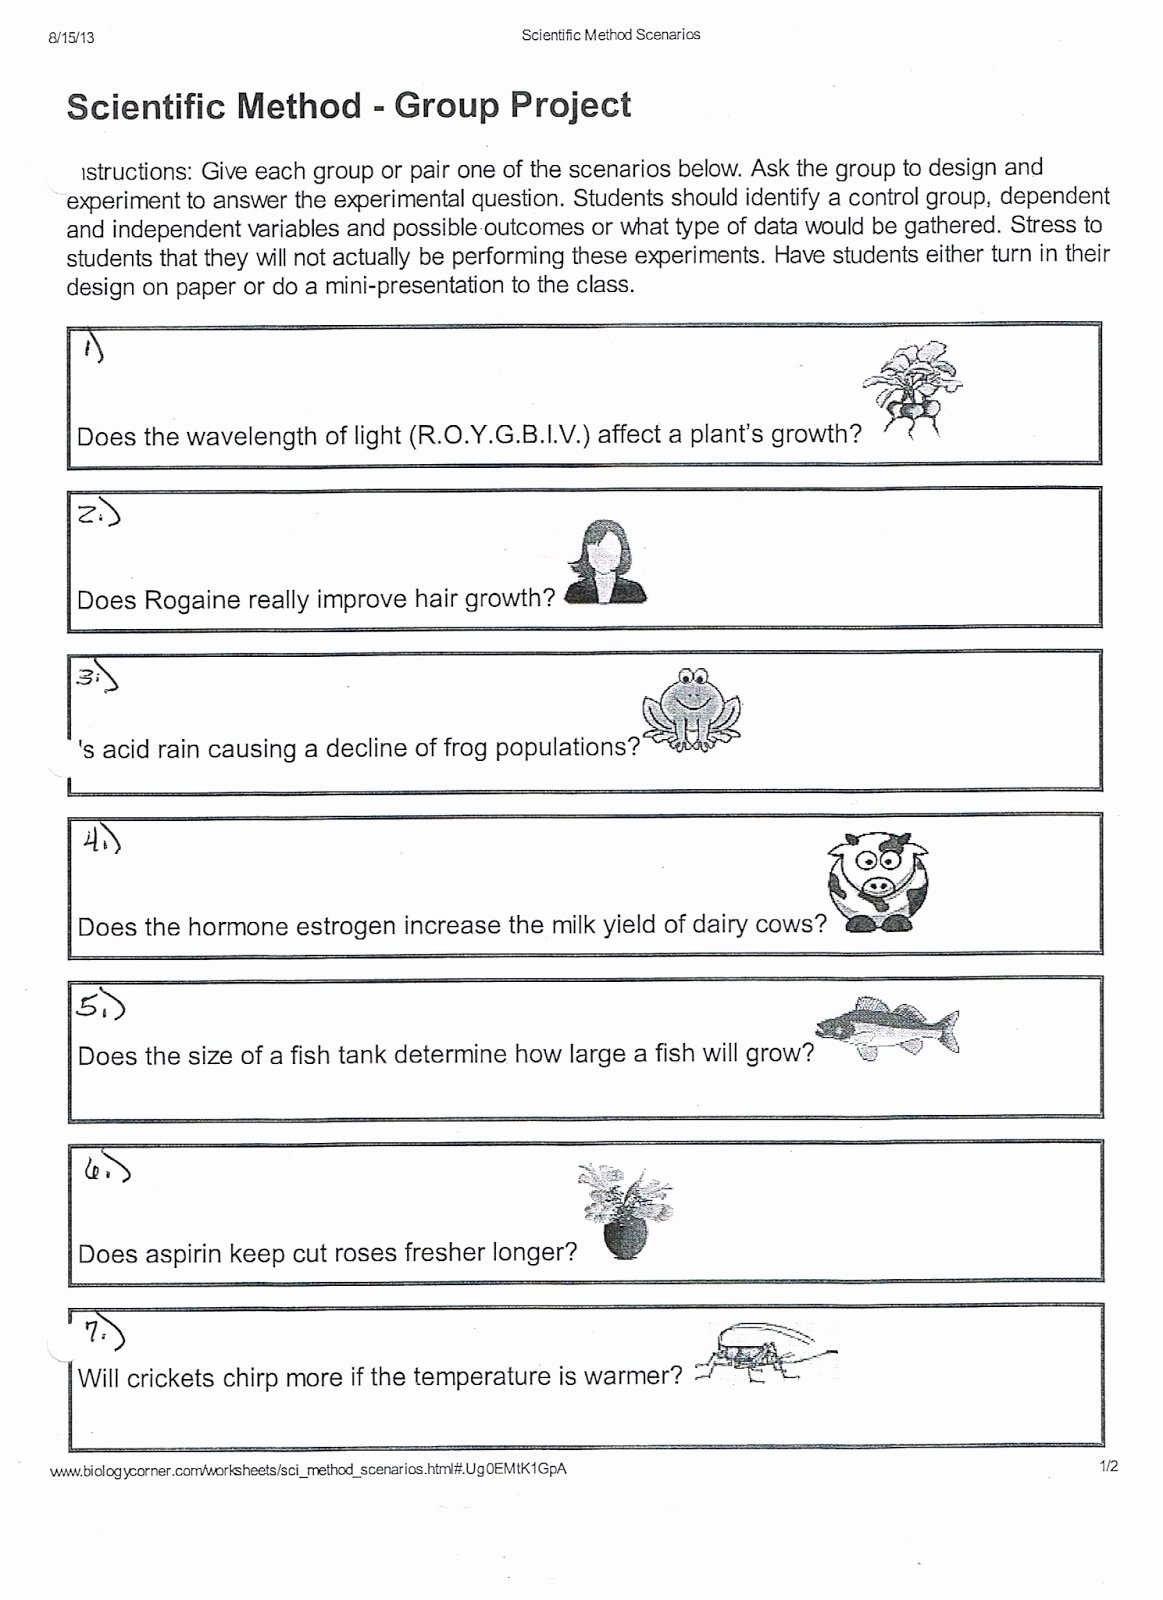 Experimental Design Worksheet Answers New 56 Experimental Design Worksheet Experimental Design